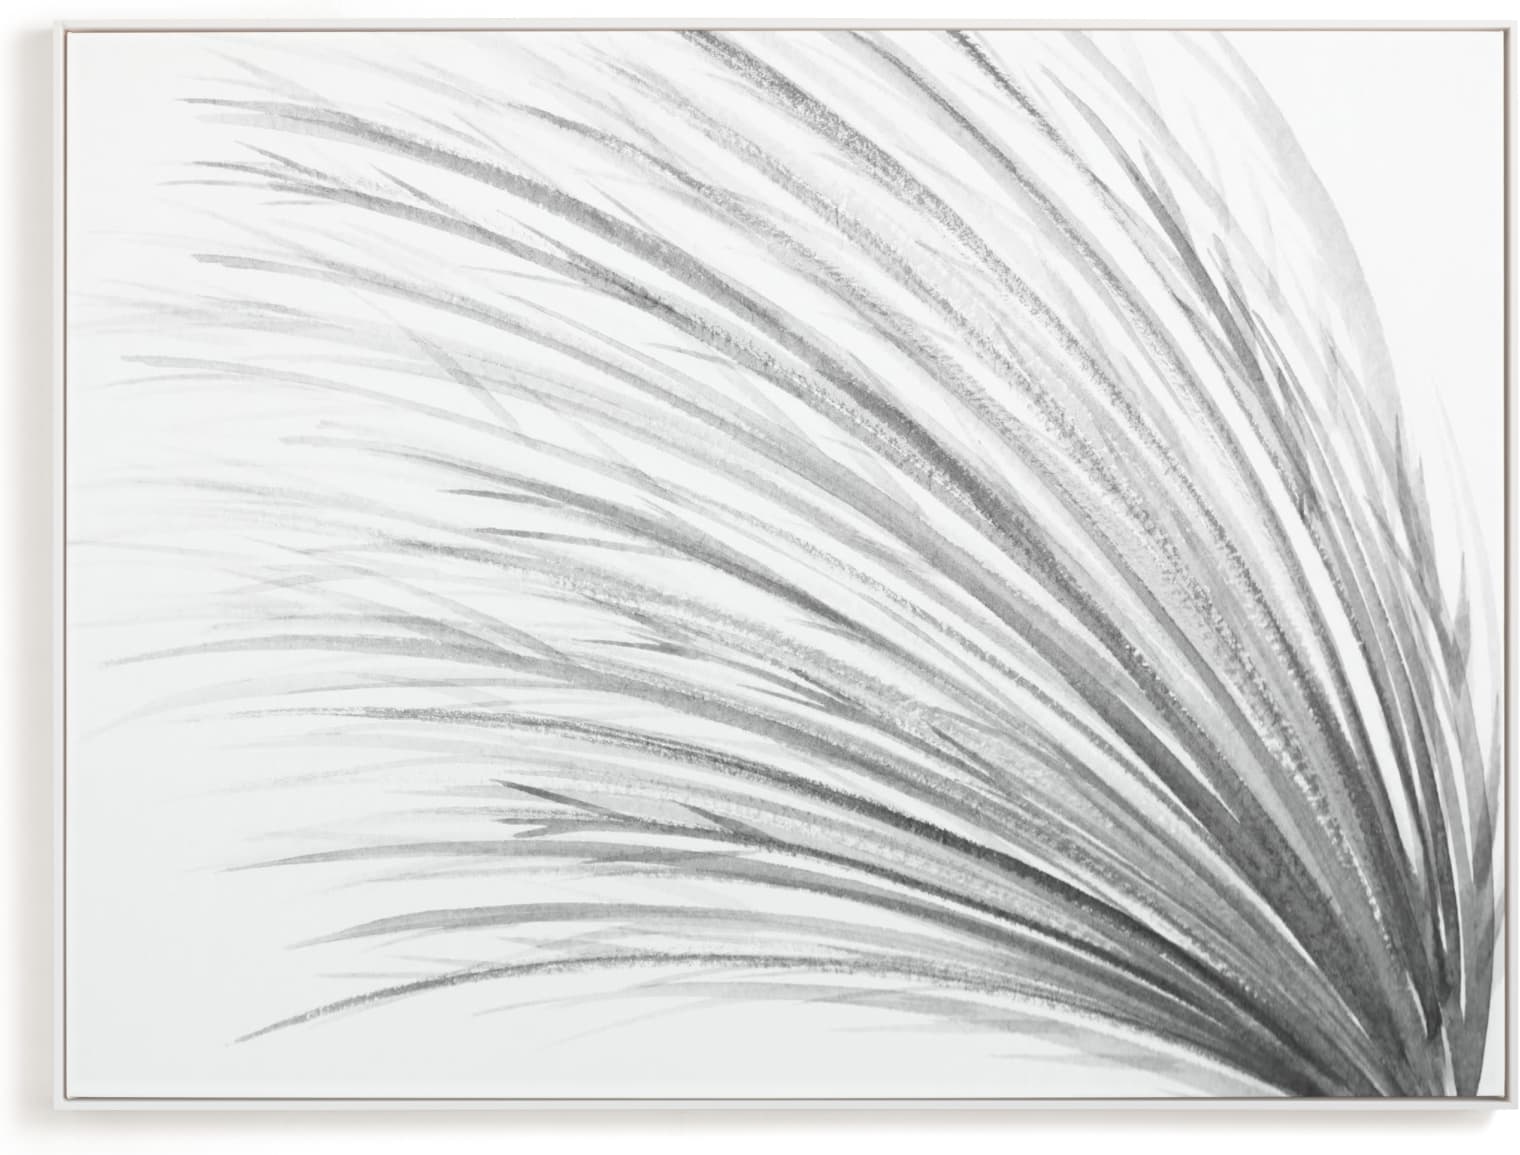 This is a black and white art by Loree Mayer called Tall Grass Watercolor.